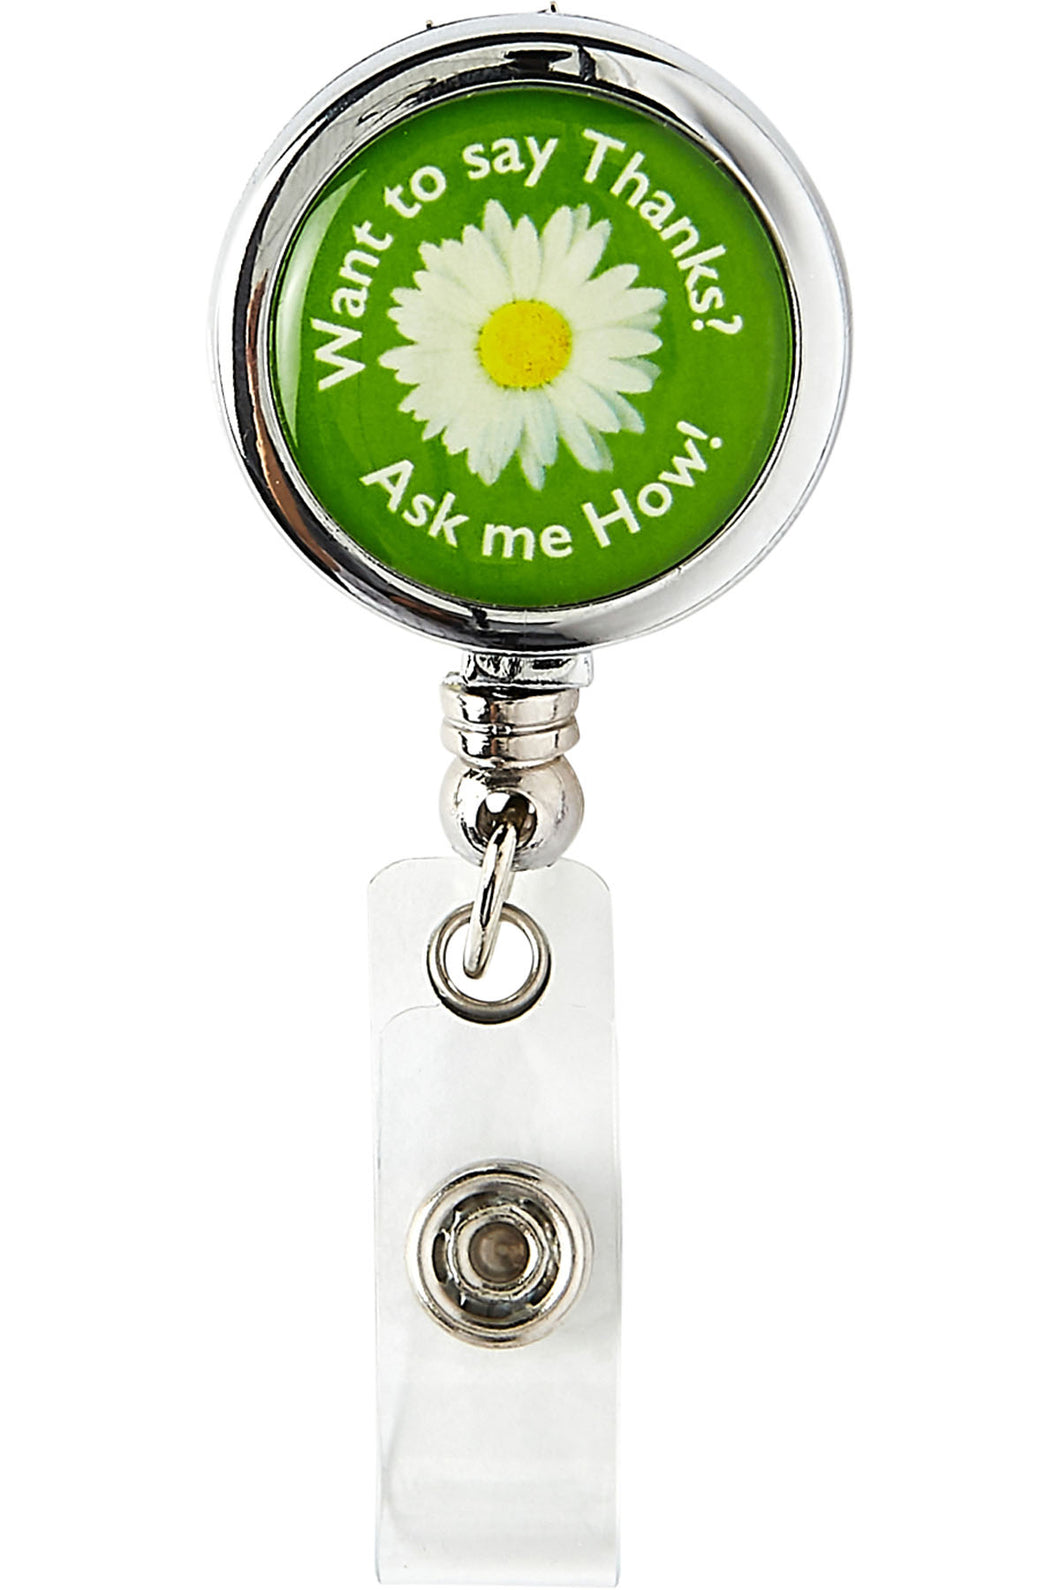 DAISY Foundation Want to Say Thanks Badge Reel